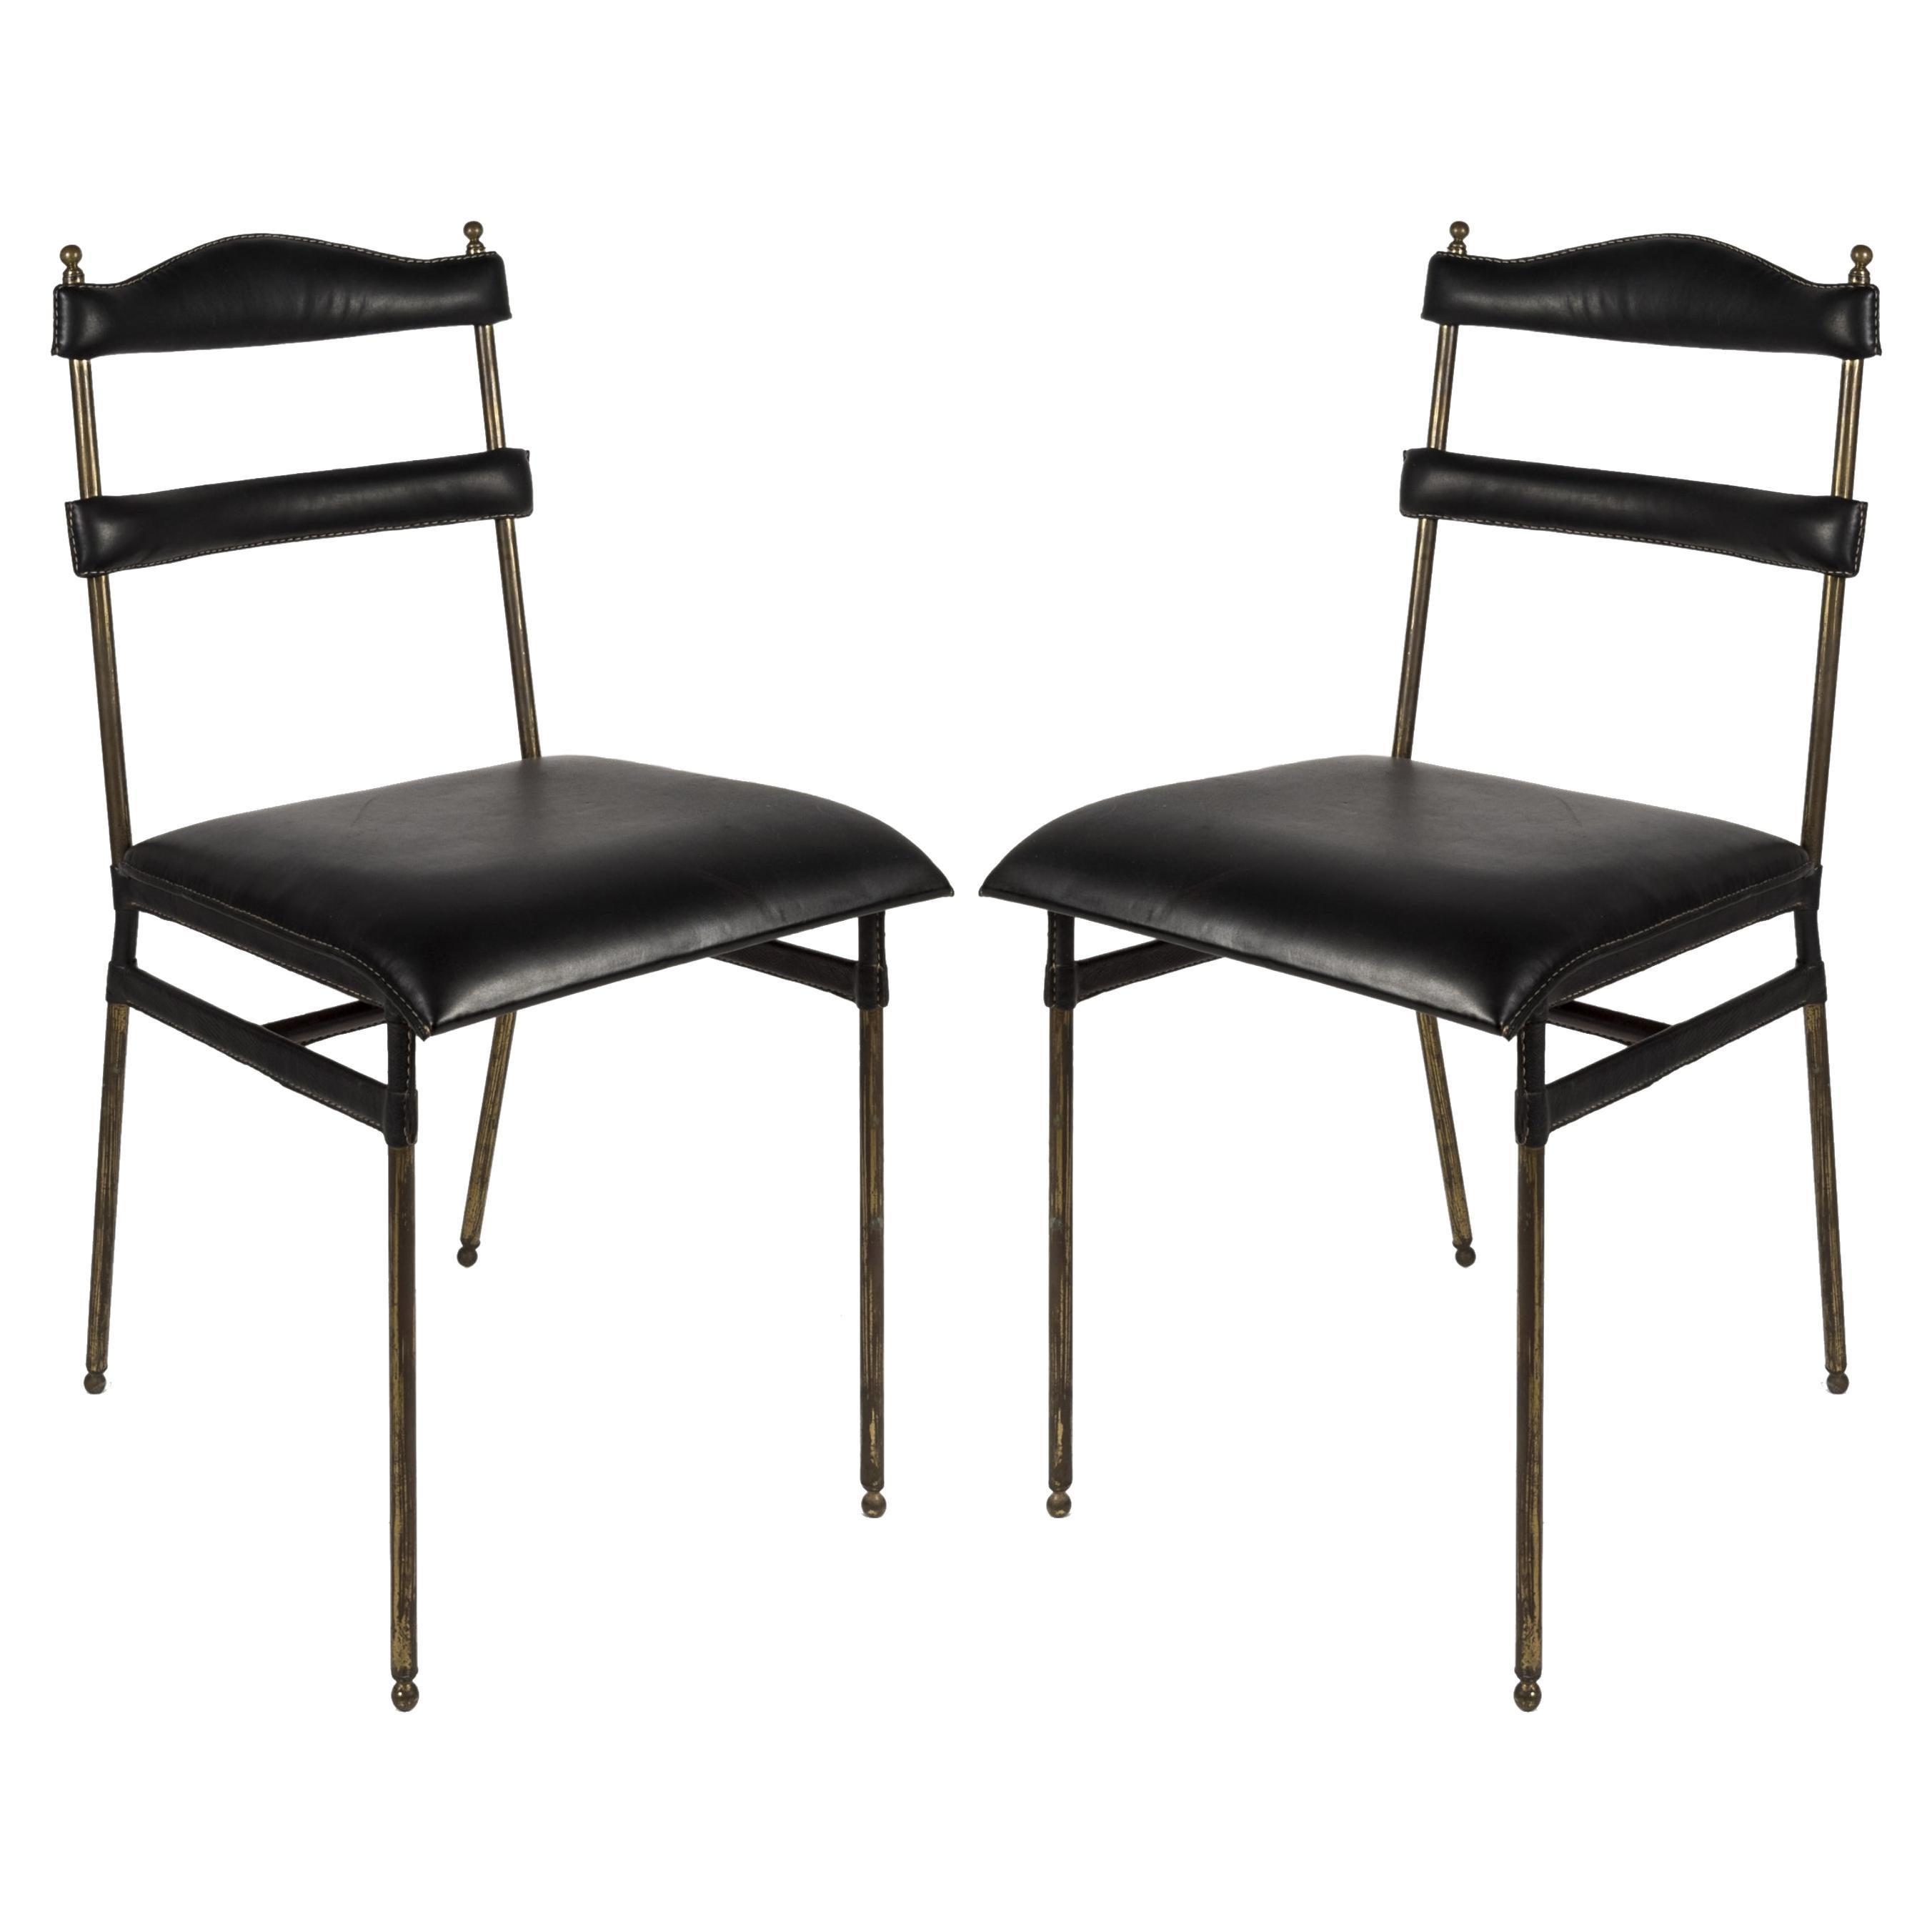 1950's Stitched Leather Pair of Chairs by Jacques Adnet For Sale